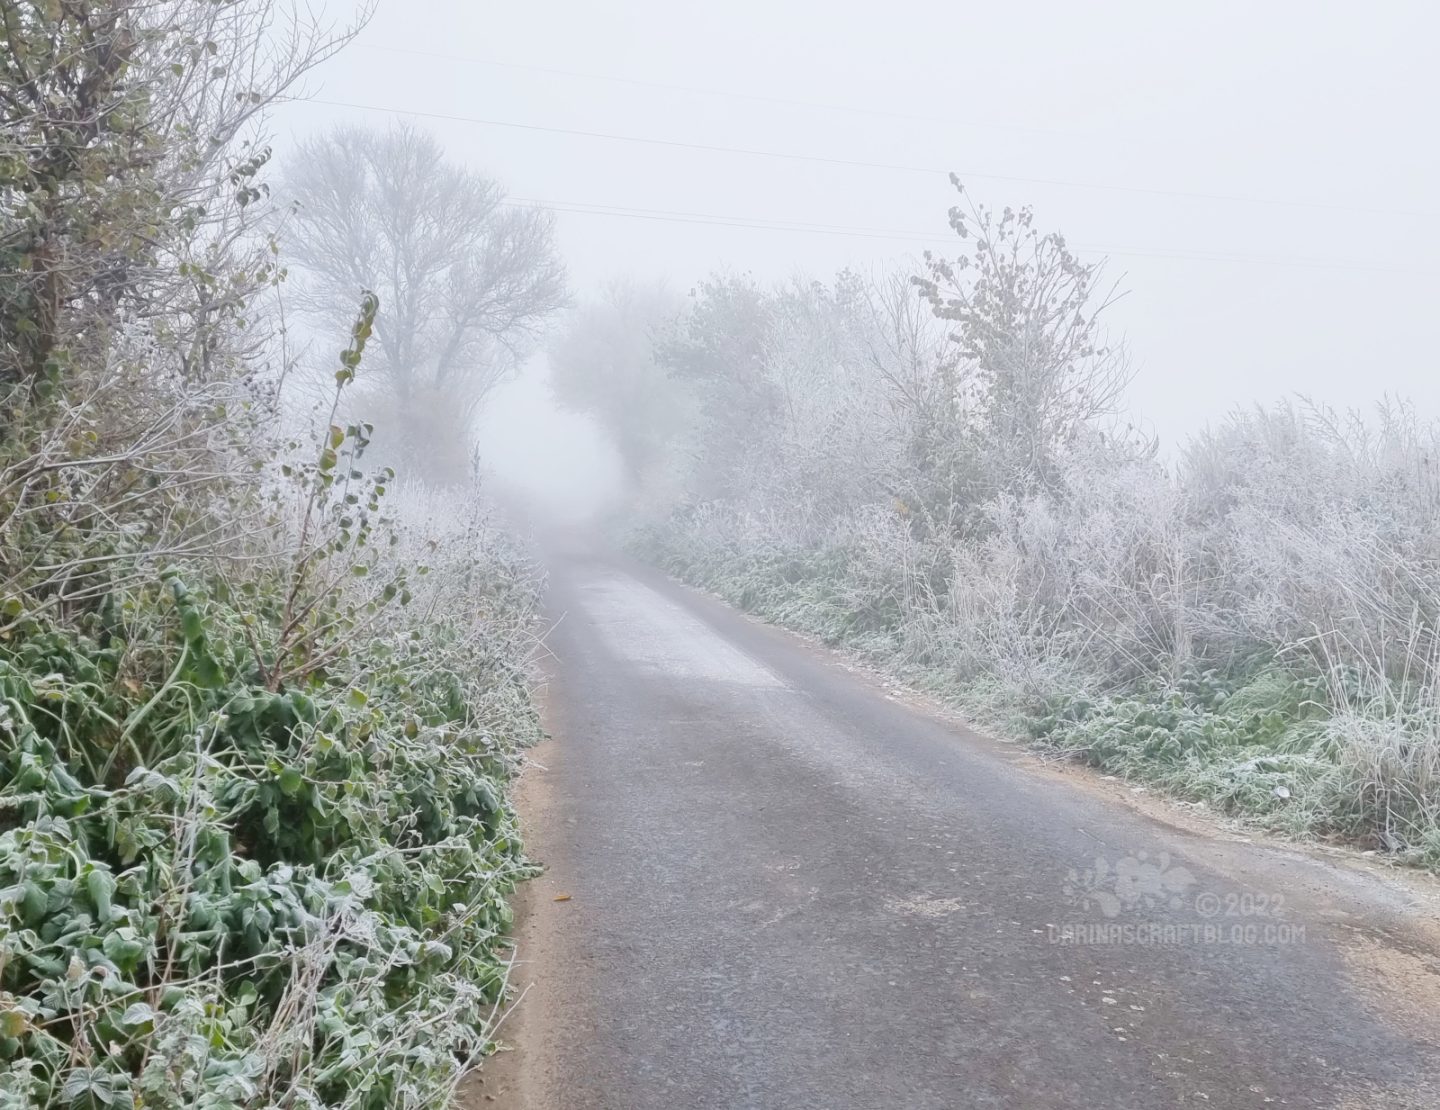 A narrow lane with trees on both sides, covered in frost. In the distance the trees are bowing together over the lane.